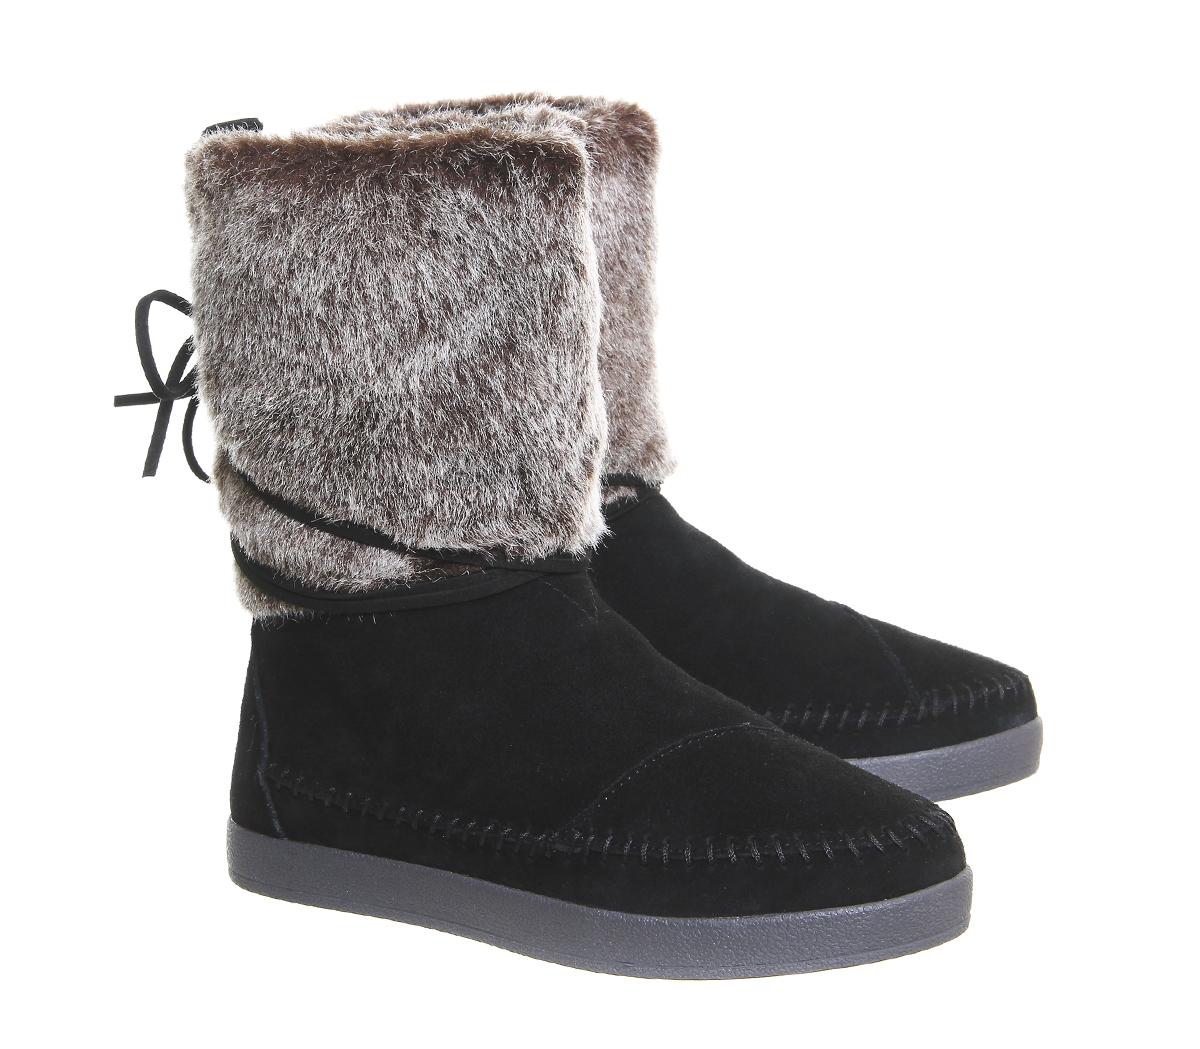 Lyst - Toms Nepal Suede Boot With Faux-fur Cuff in Black